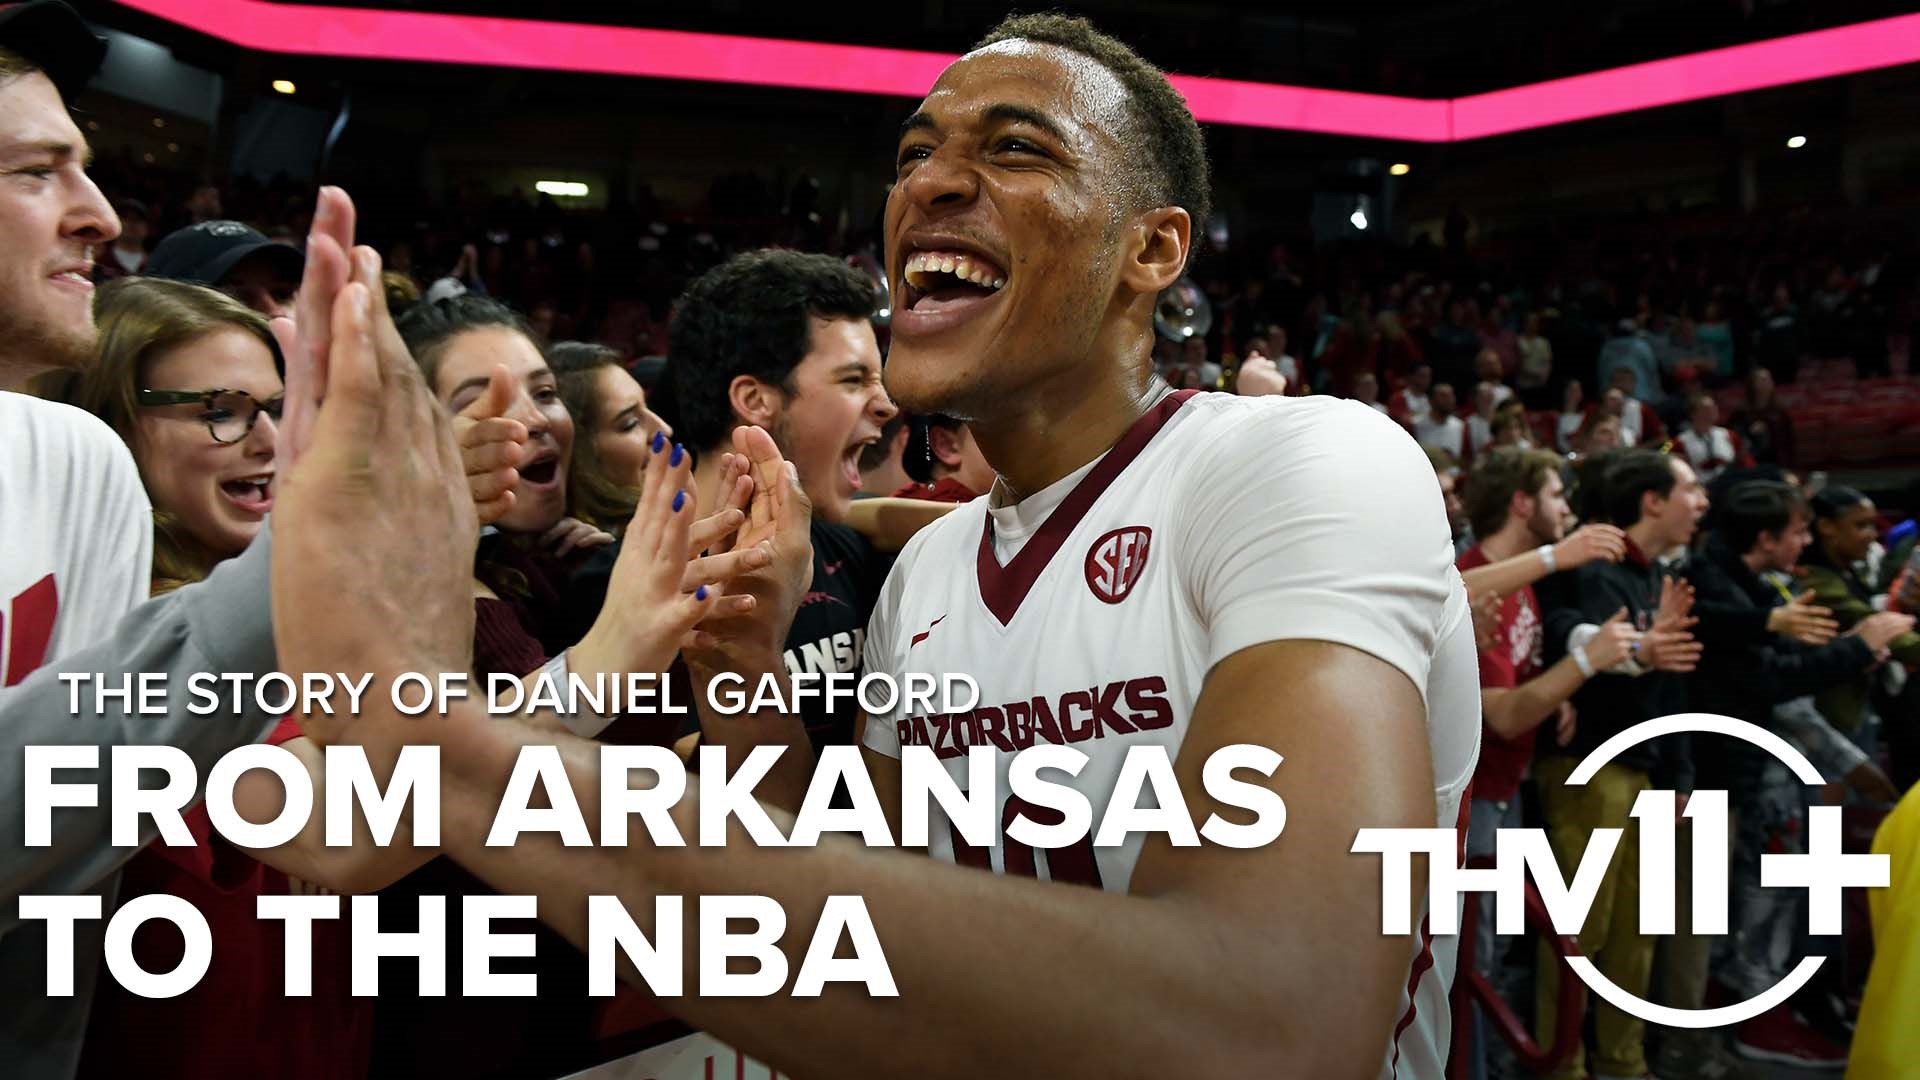 Back in 2019, Daniel Gafford-- a fan favorite from the Razorback basketball team-- entered the NBA Draft where he was selected with the 38th overall pick.